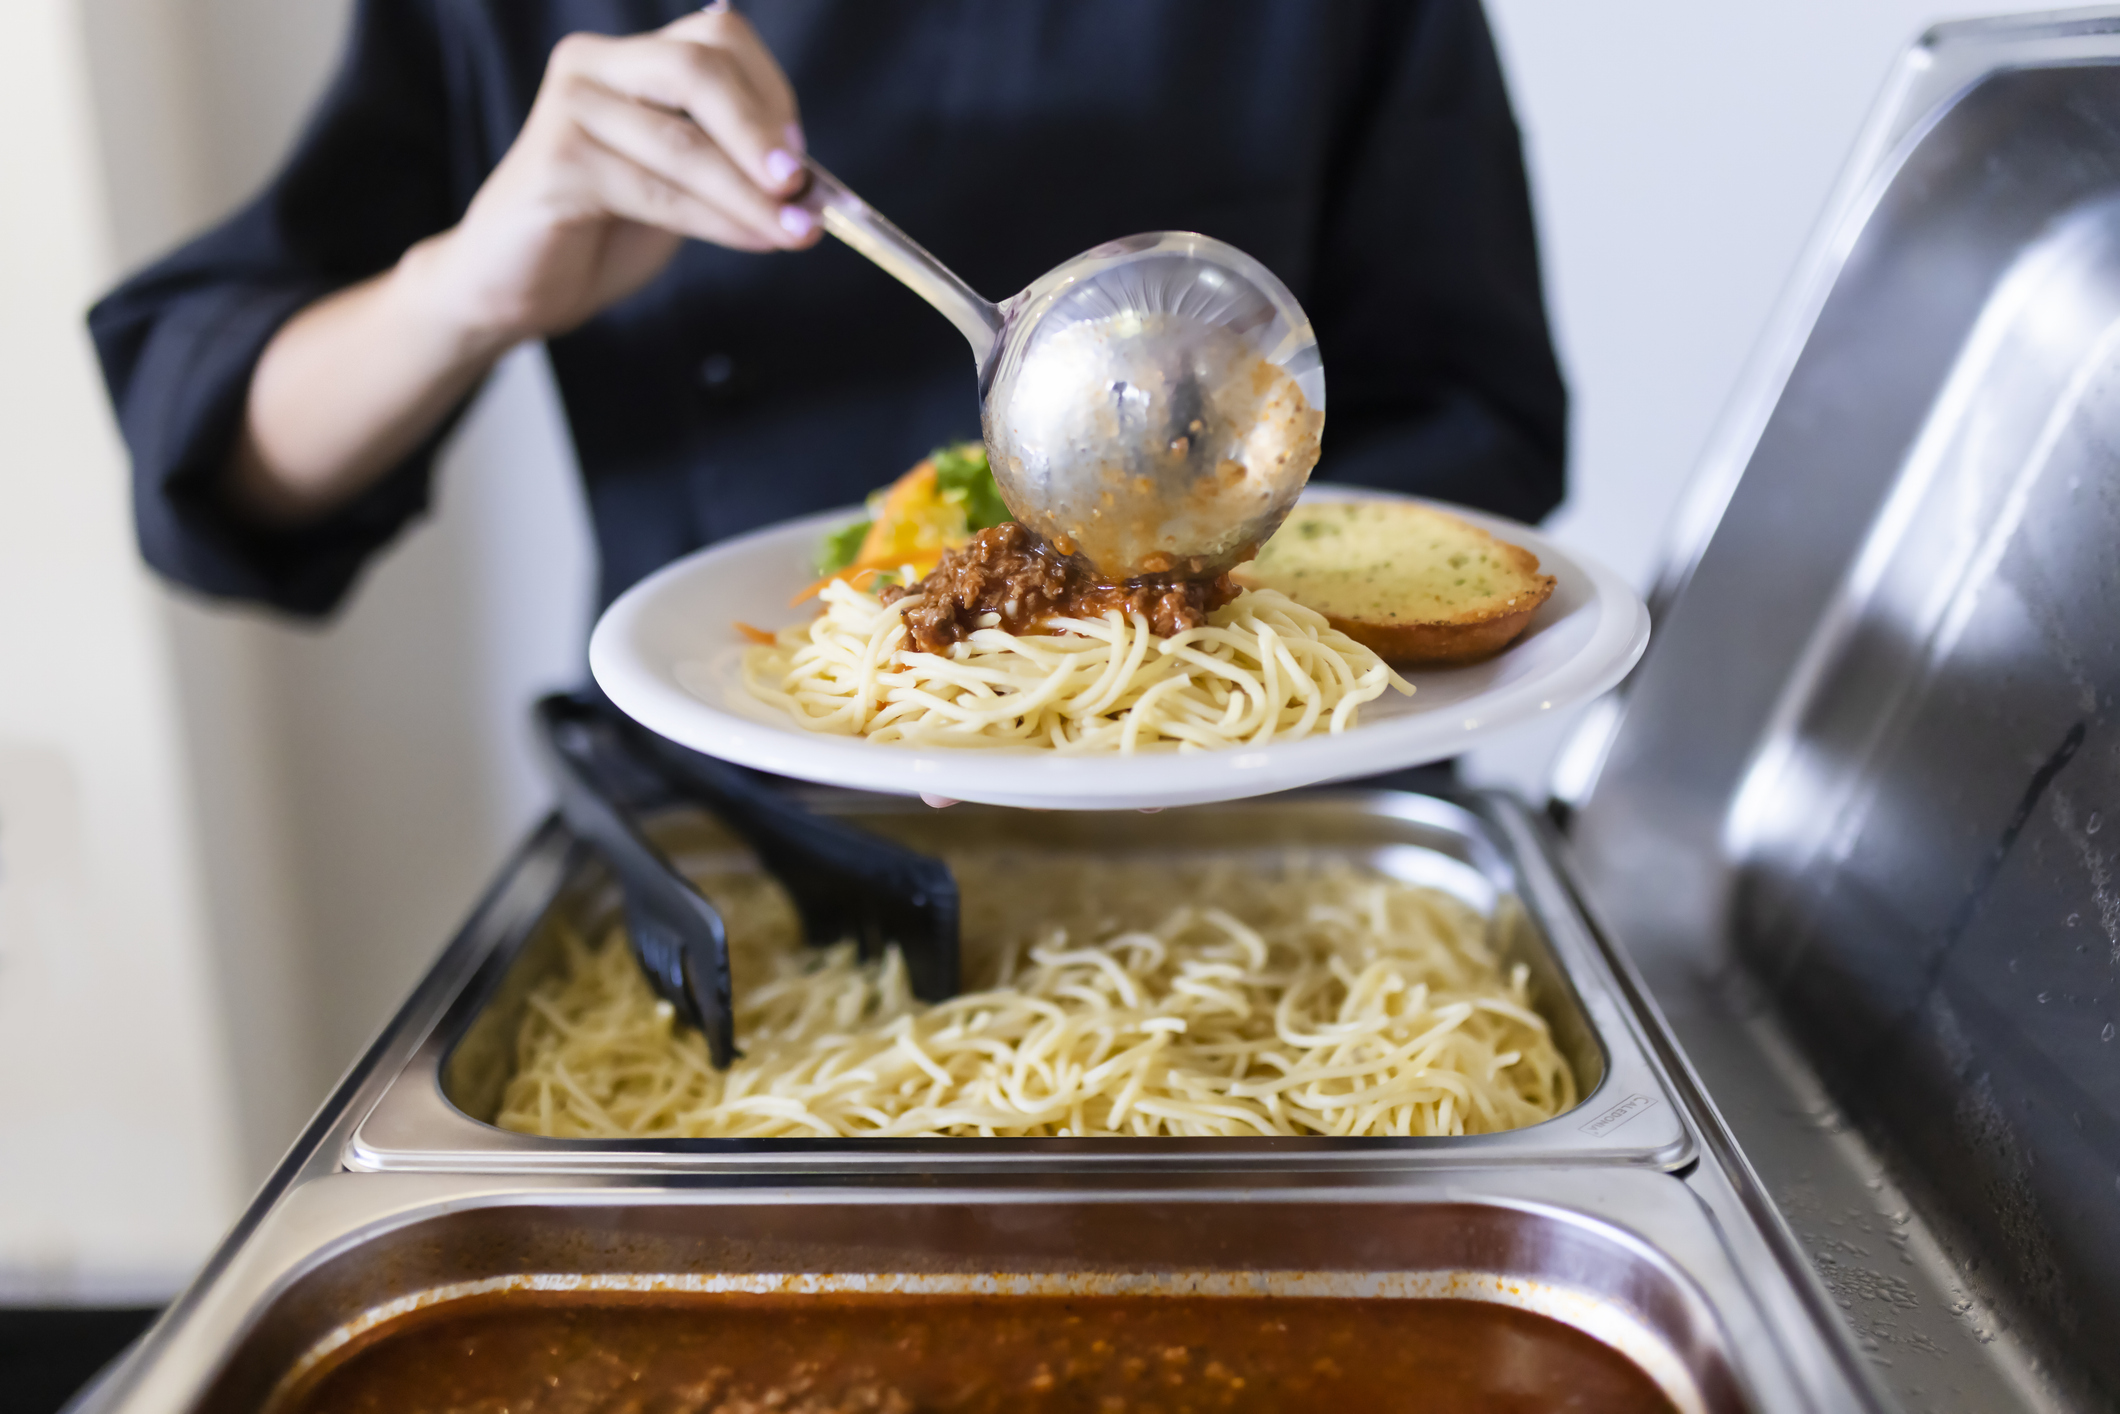 Cook serving food on a plate stock photo